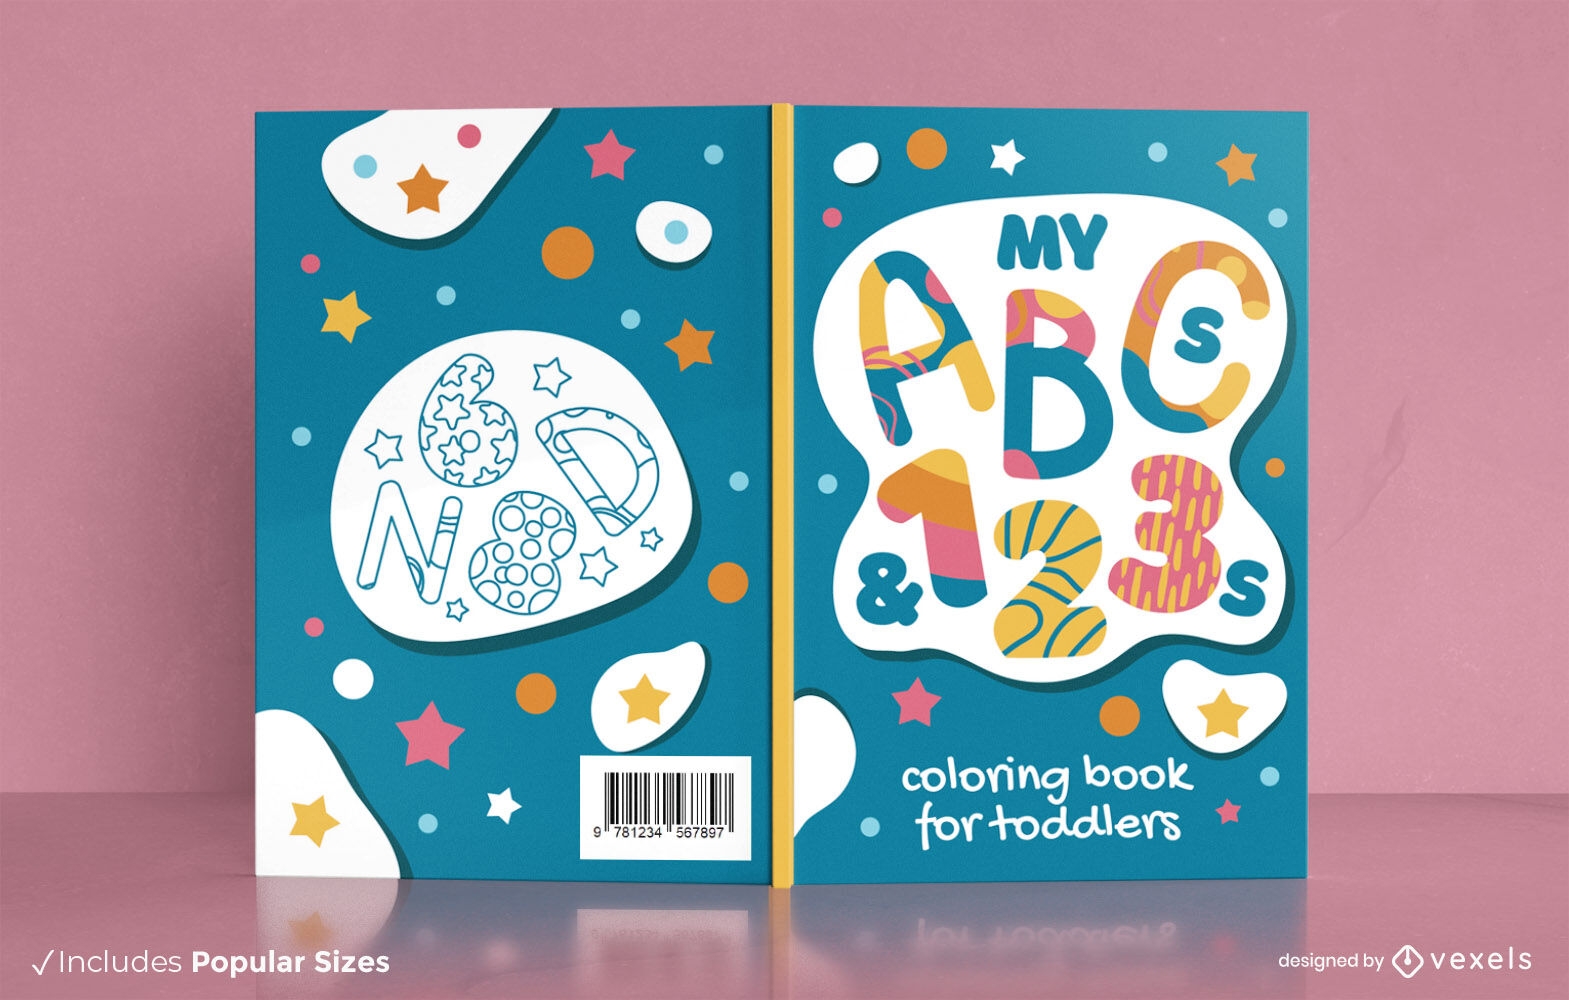 https://images.vexels.com/content/323104/preview/abc-childen-s-coloring-book-cover-design-kdp-39fce3.png